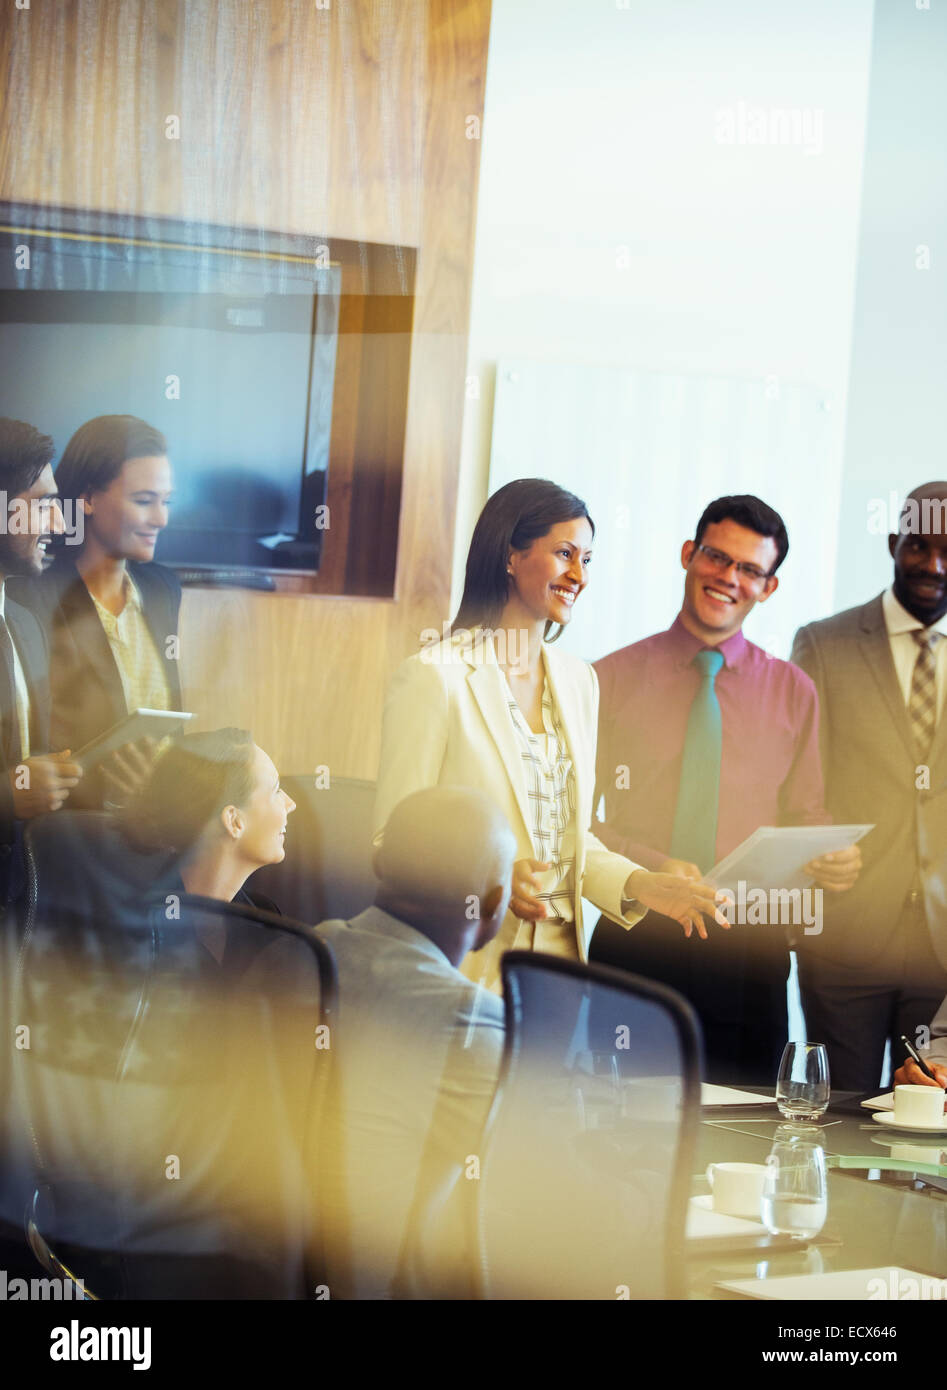 Group of business people smiling and discussing in conference room Stock Photo